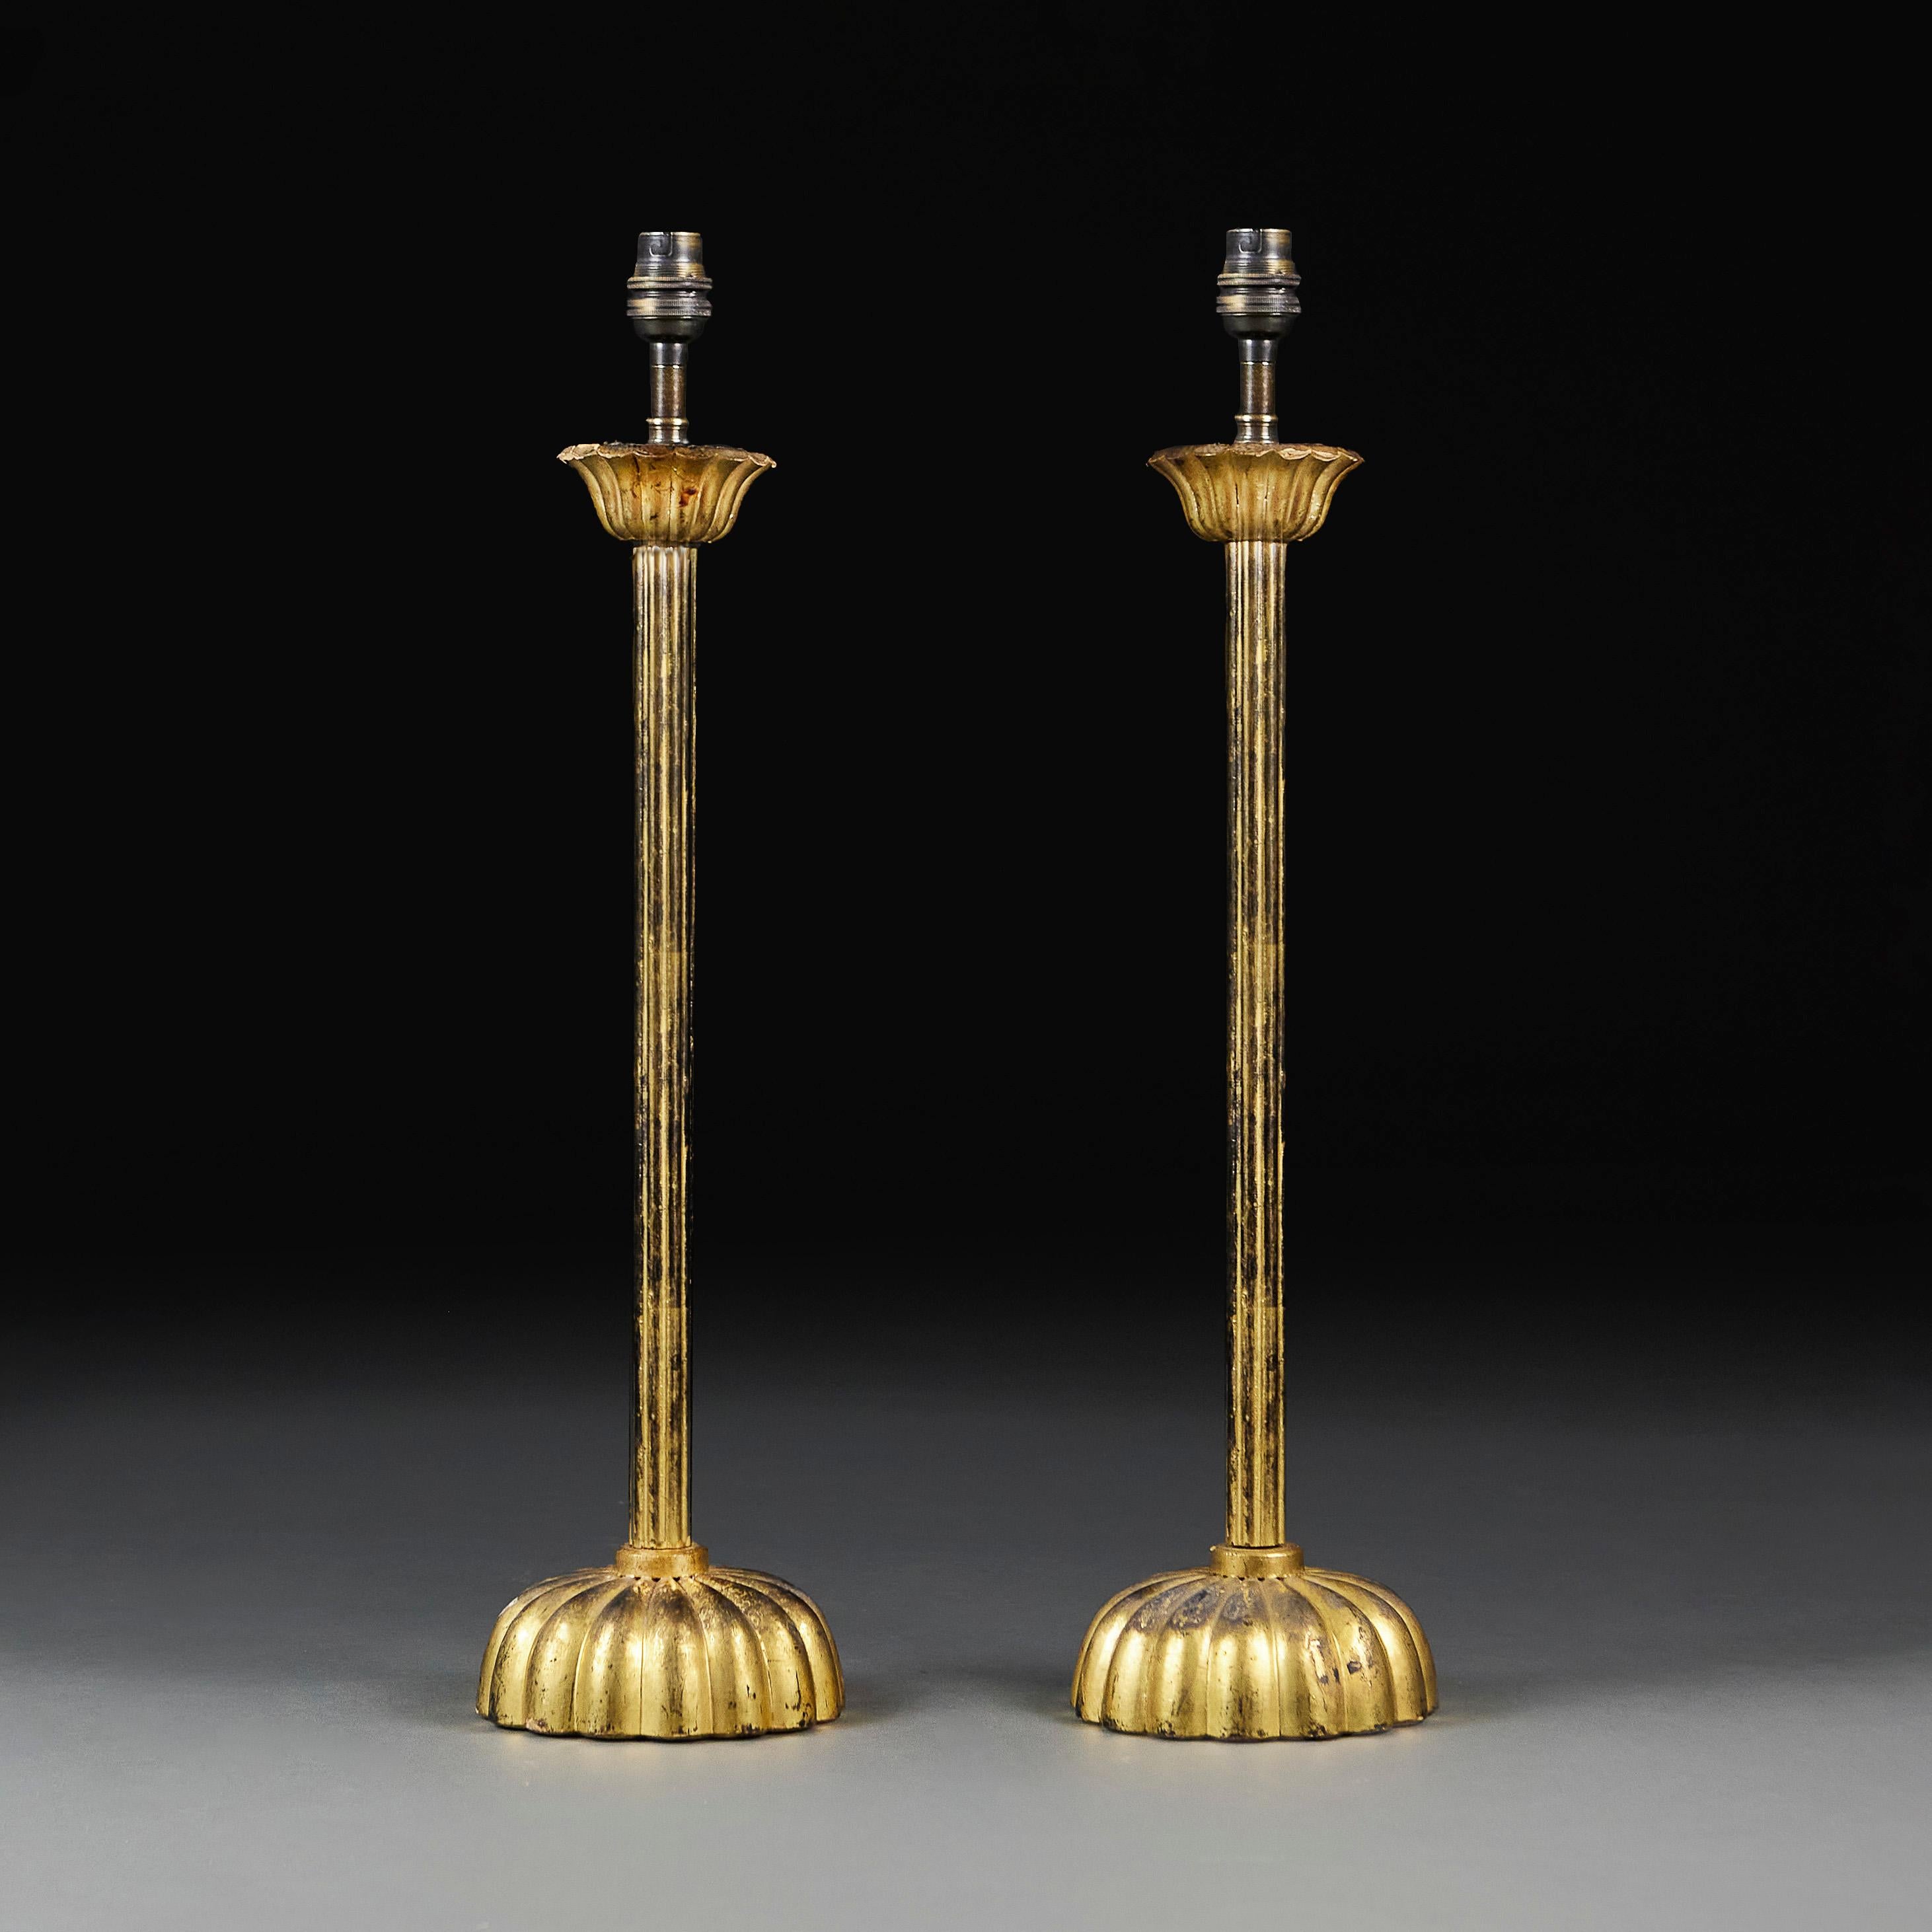 Wood A Large Pair Of 19th Century Japanese Candlestick Lamps For Sale